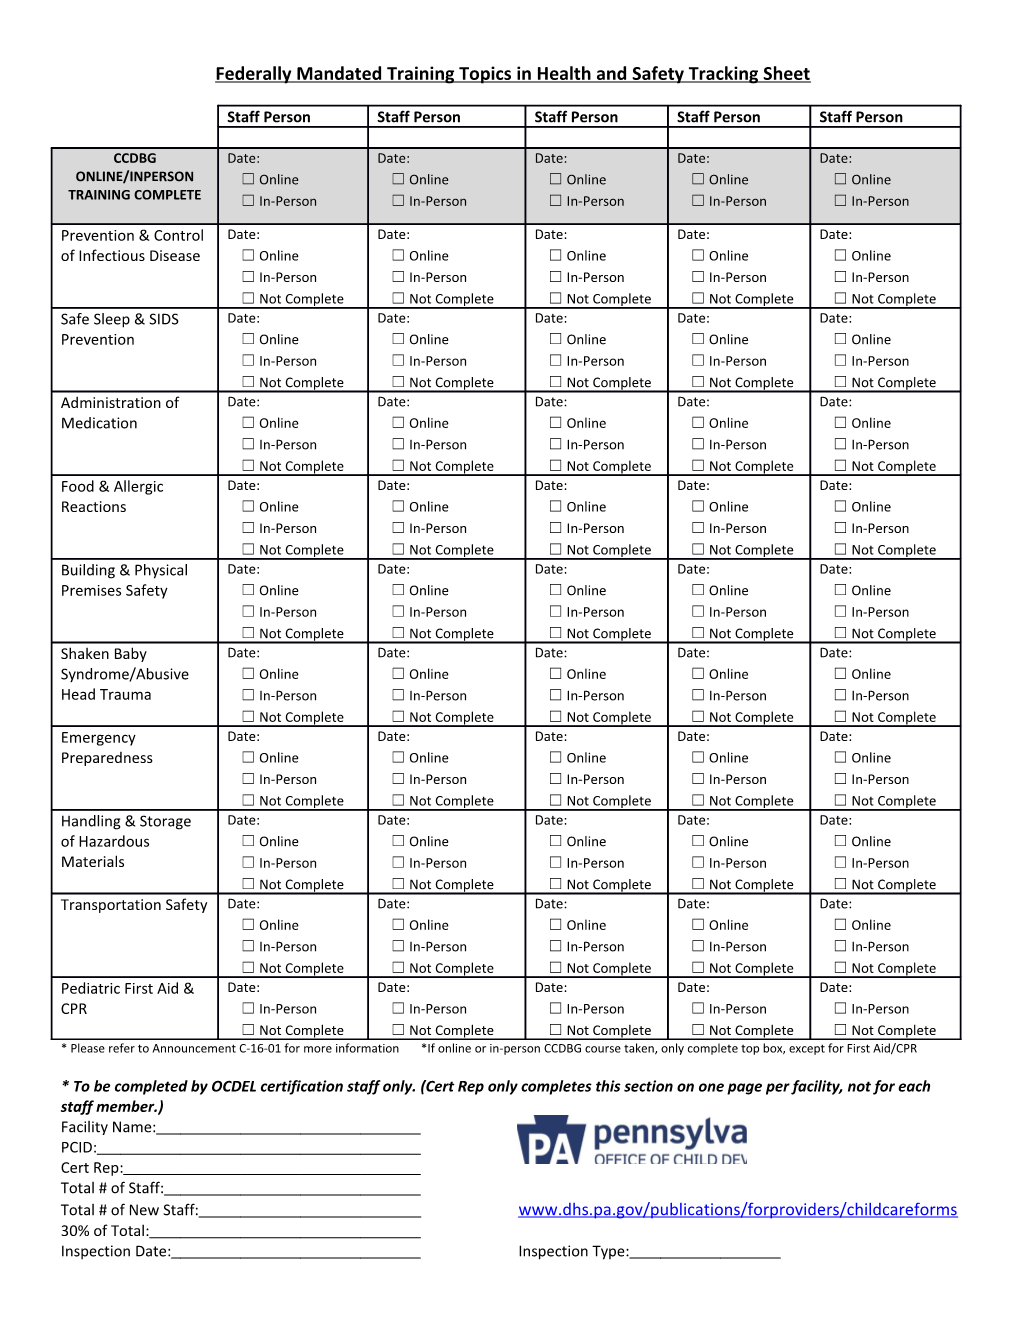 Federally Mandated Training Topics in Health and Safety Tracking Sheet